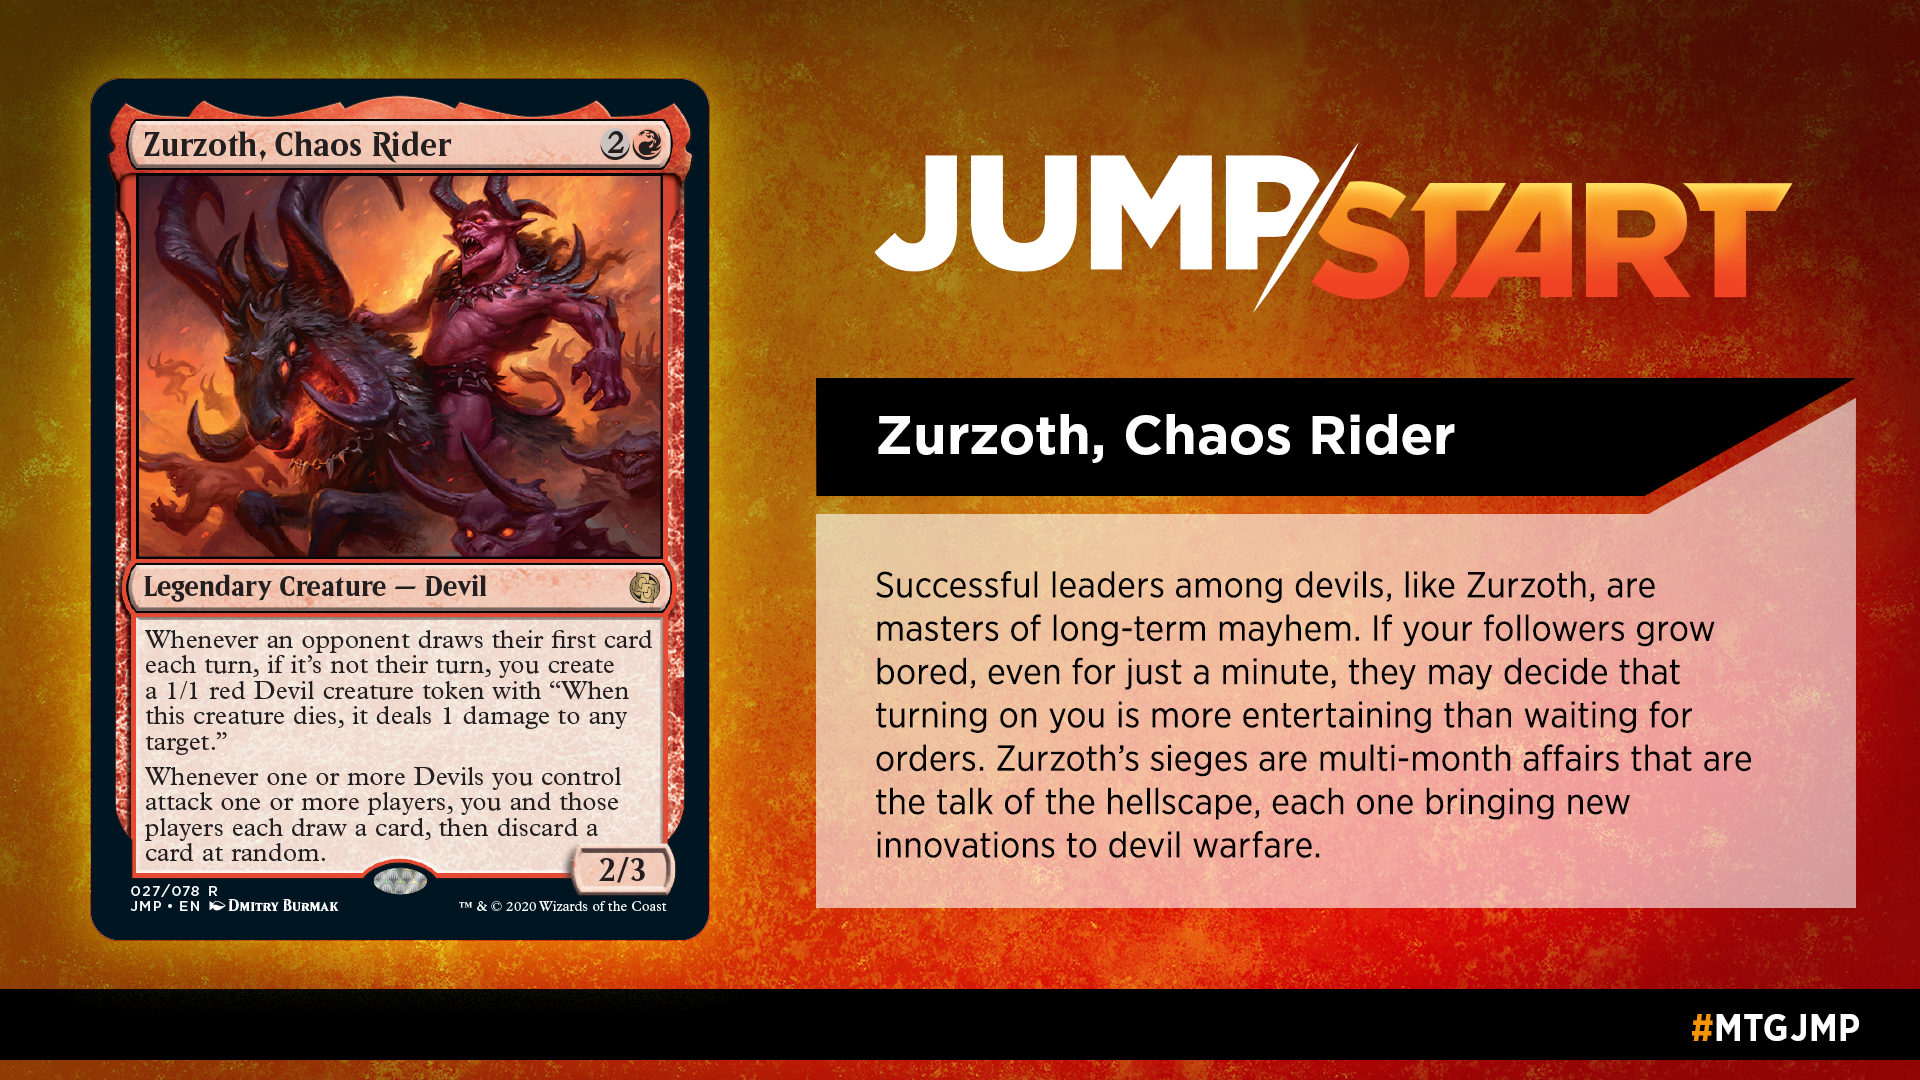 M21_Preview_Plan_JumpStart_graphic_7_1920x1080.png